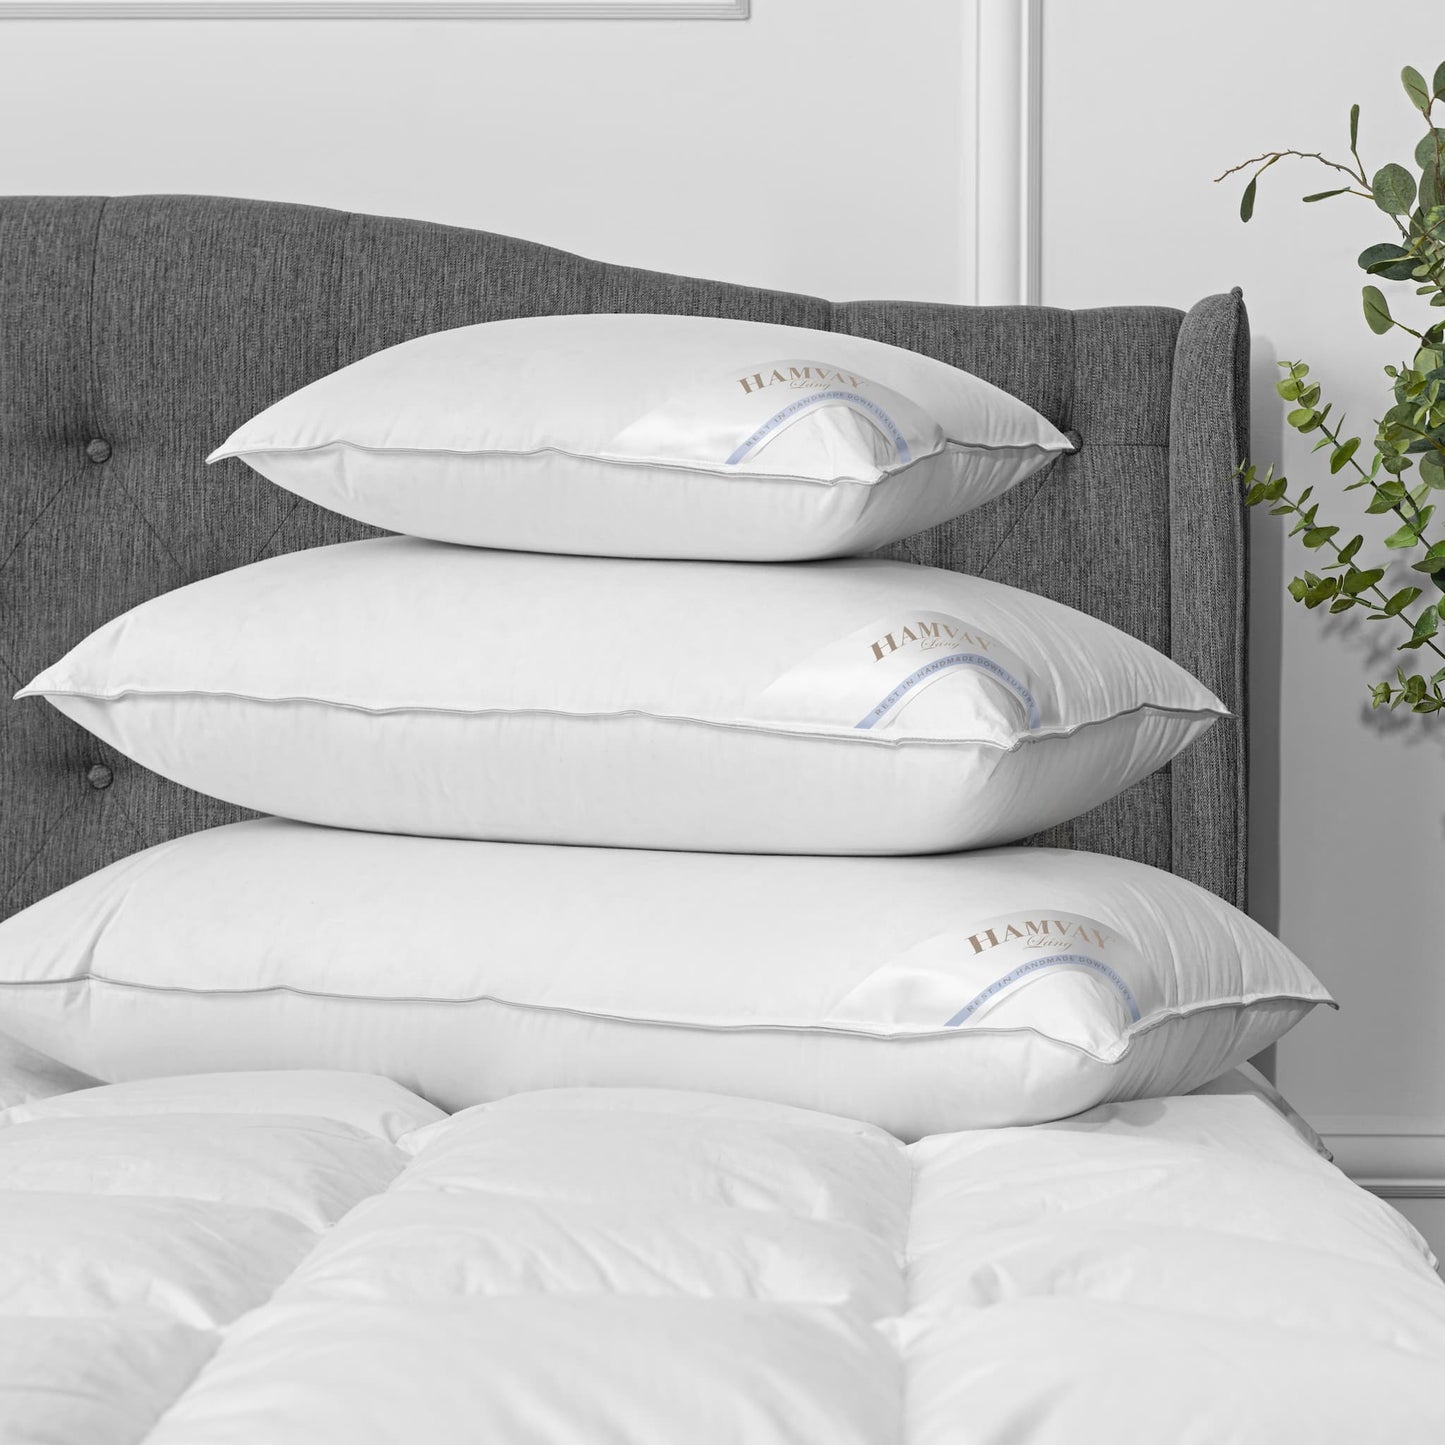 https://www.hamvay-lang.com/cdn/shop/files/hungarian-goose-down-and-feather-pillows-pure-comfort-3-sizes-on-top.jpg?v=1696405914&width=1445